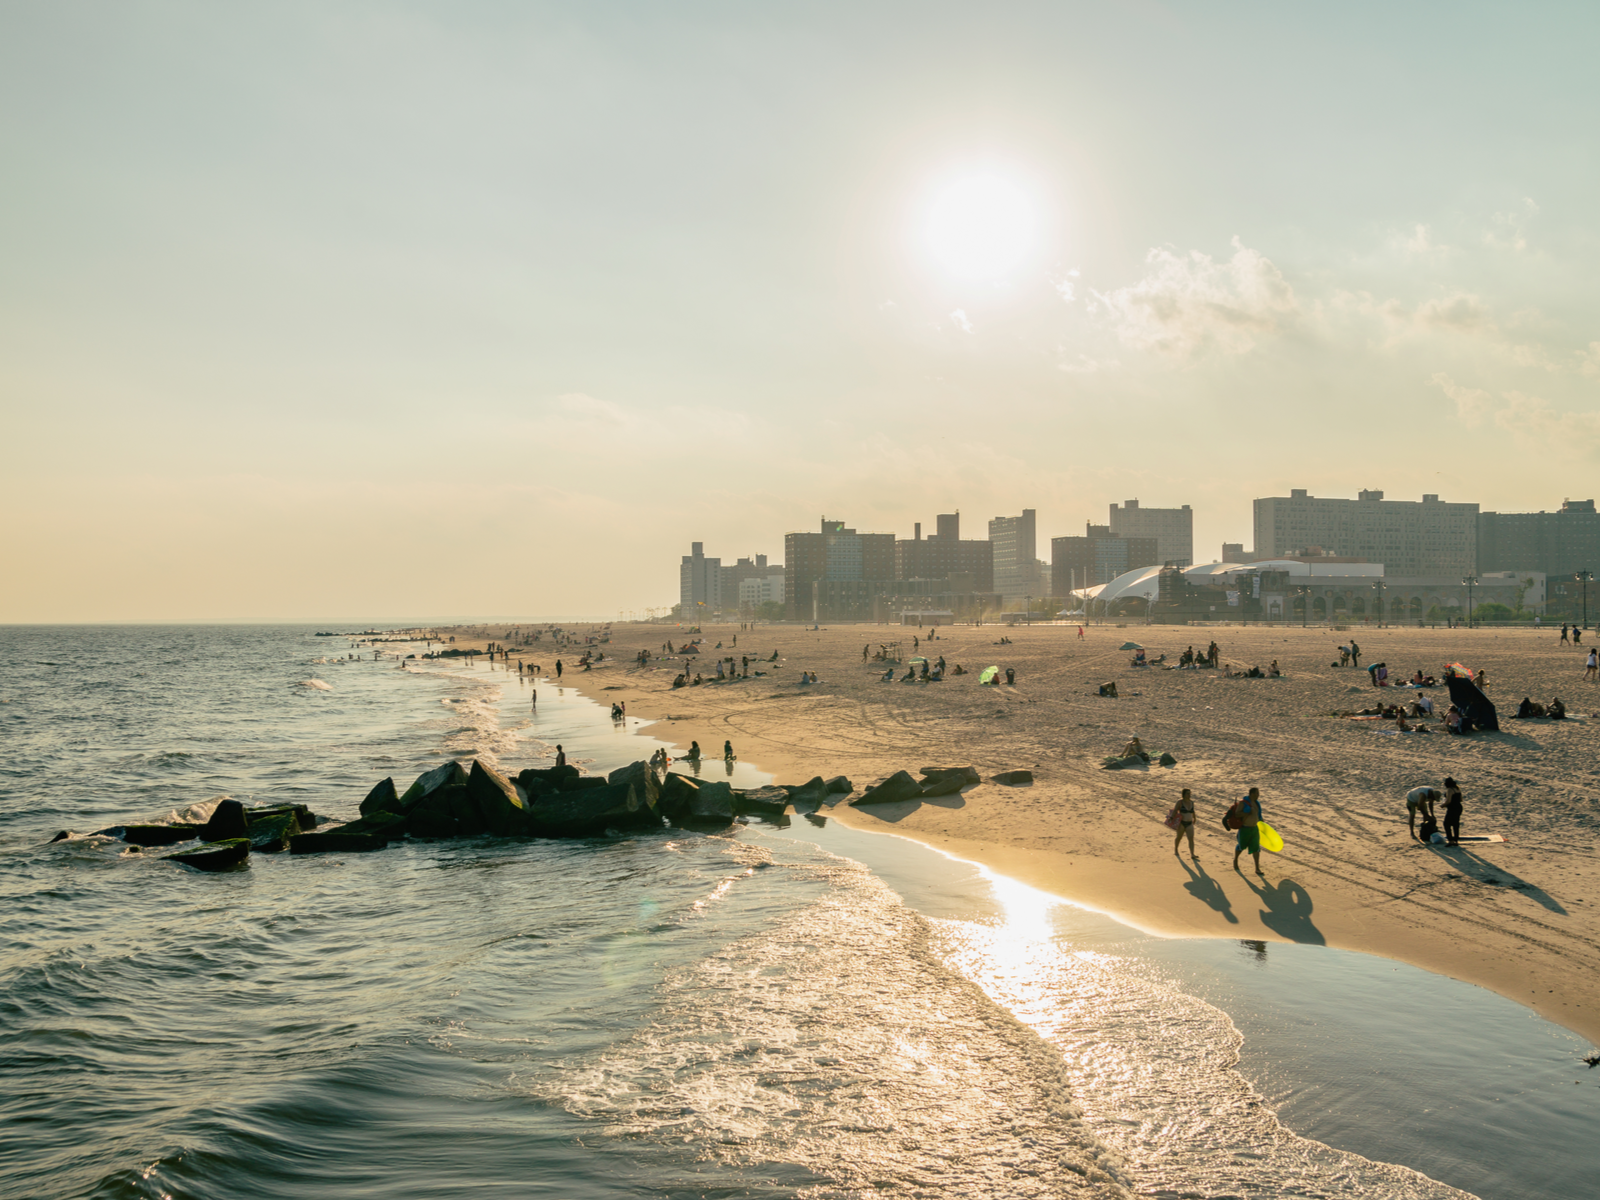 The golden hour over Brighton Beach in New York where people are enjoying the shore and the cityscape in background, one of the best beaches on the East Coast